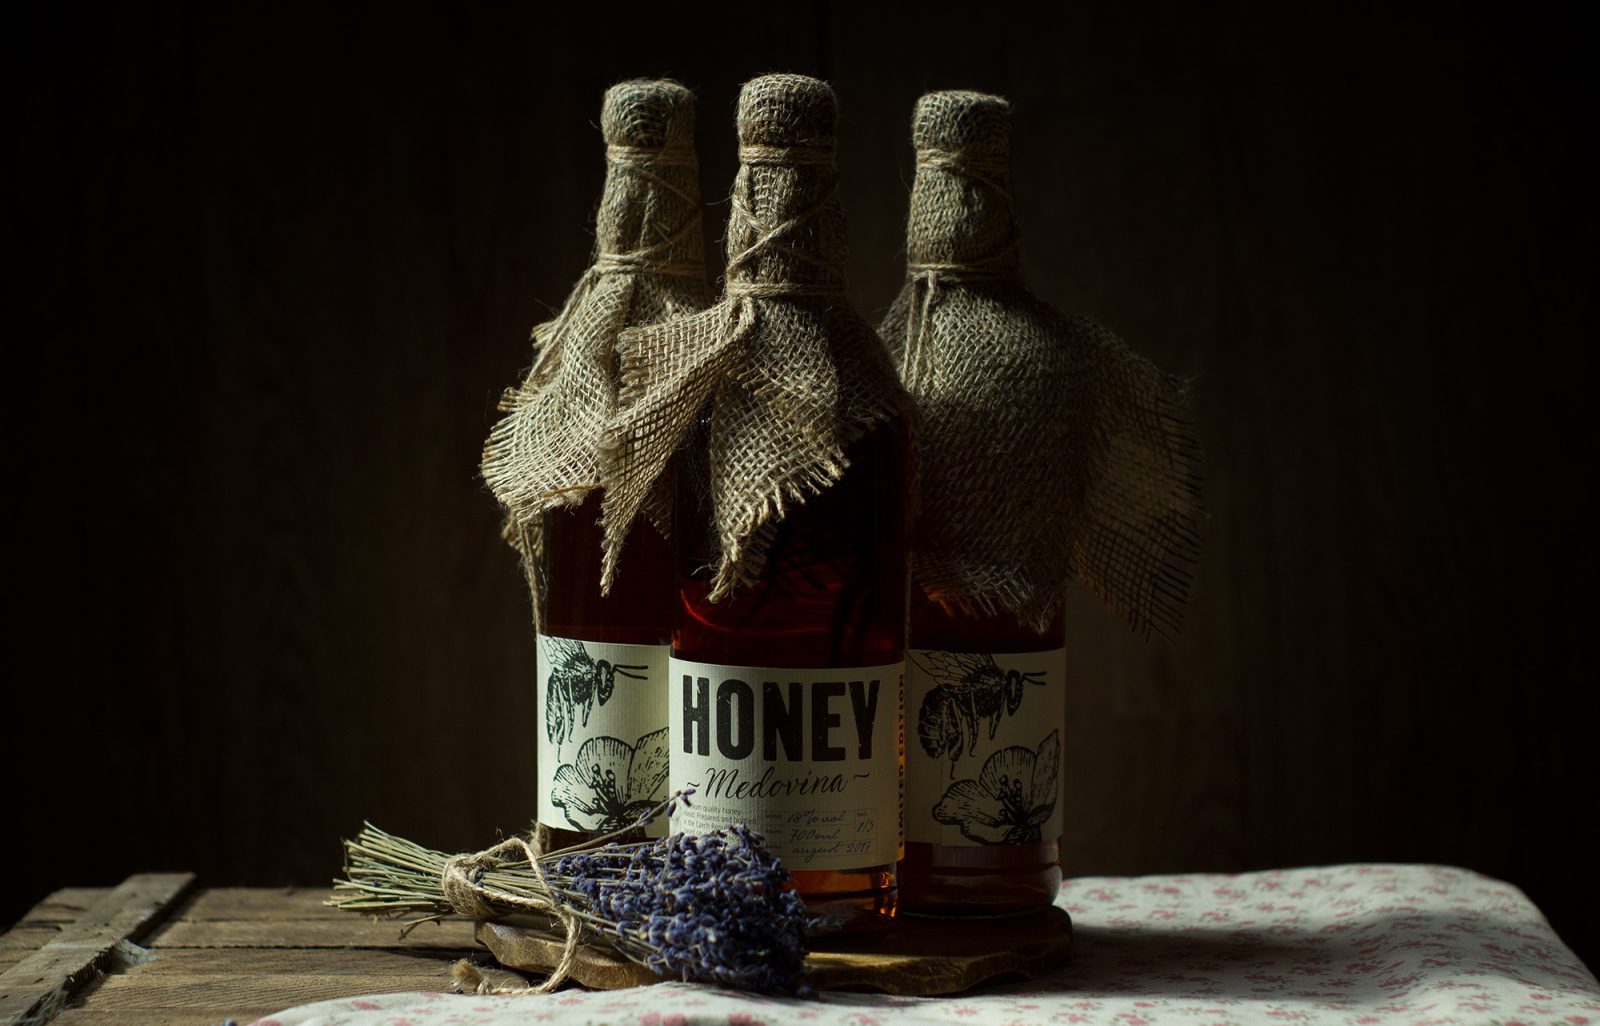 “Honey” Mead Label and Package Design